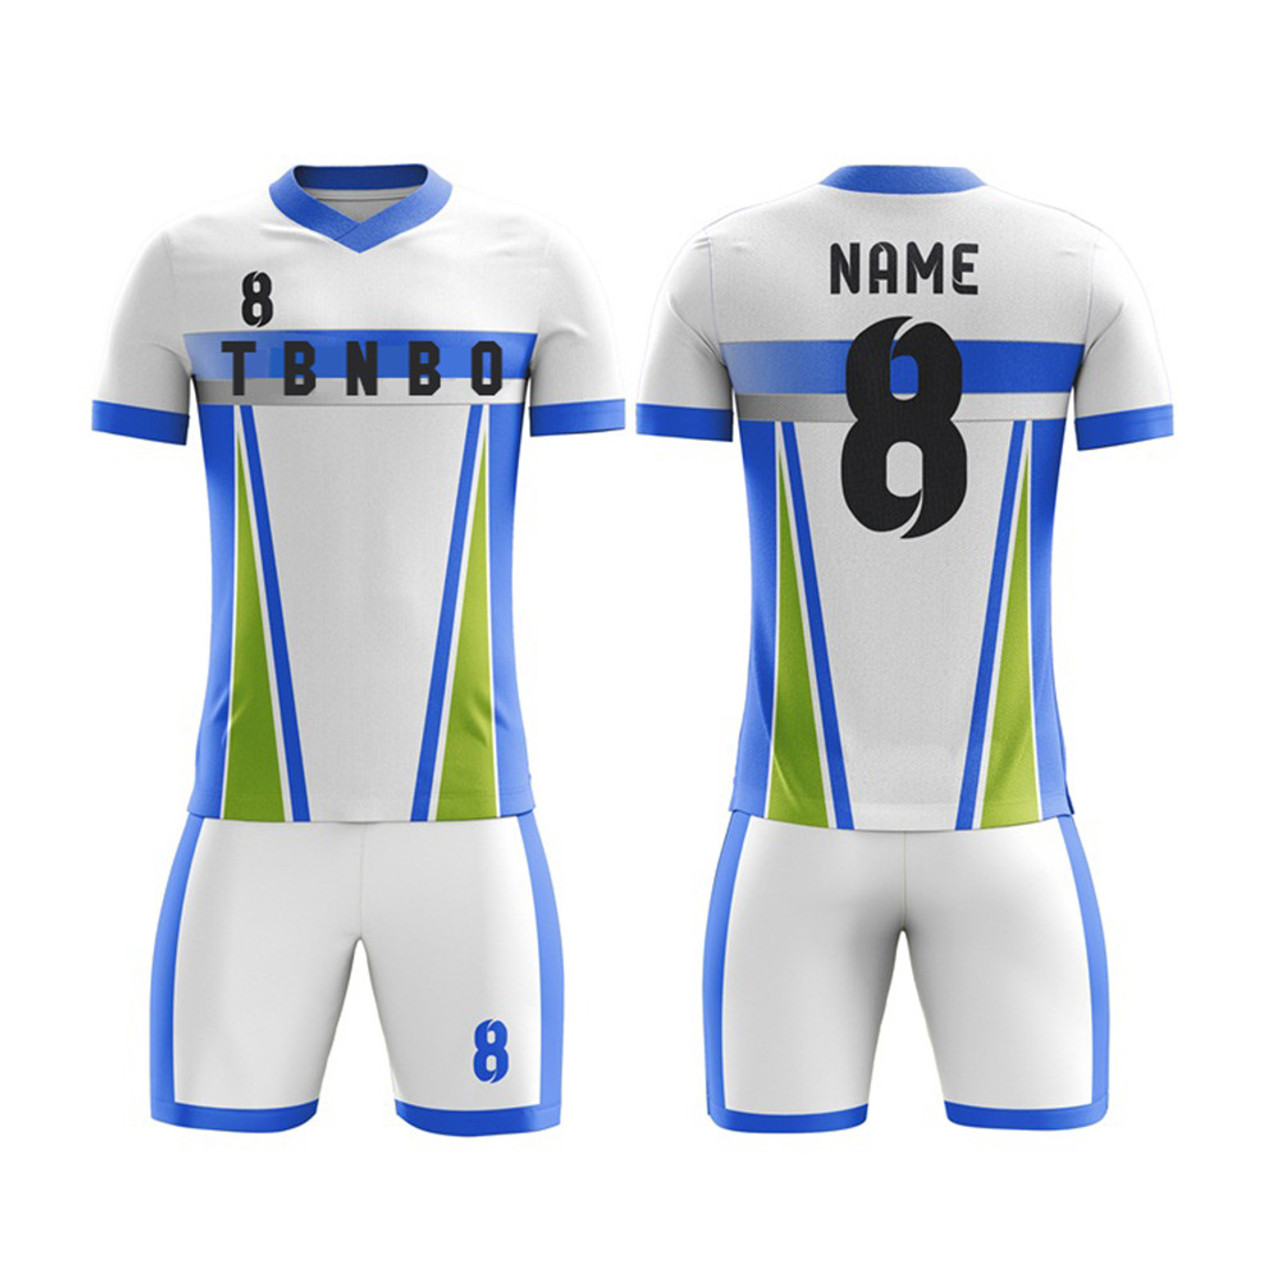 Soccer Uniform Kit Shirts And Shorts Customized With Logo Name And Number